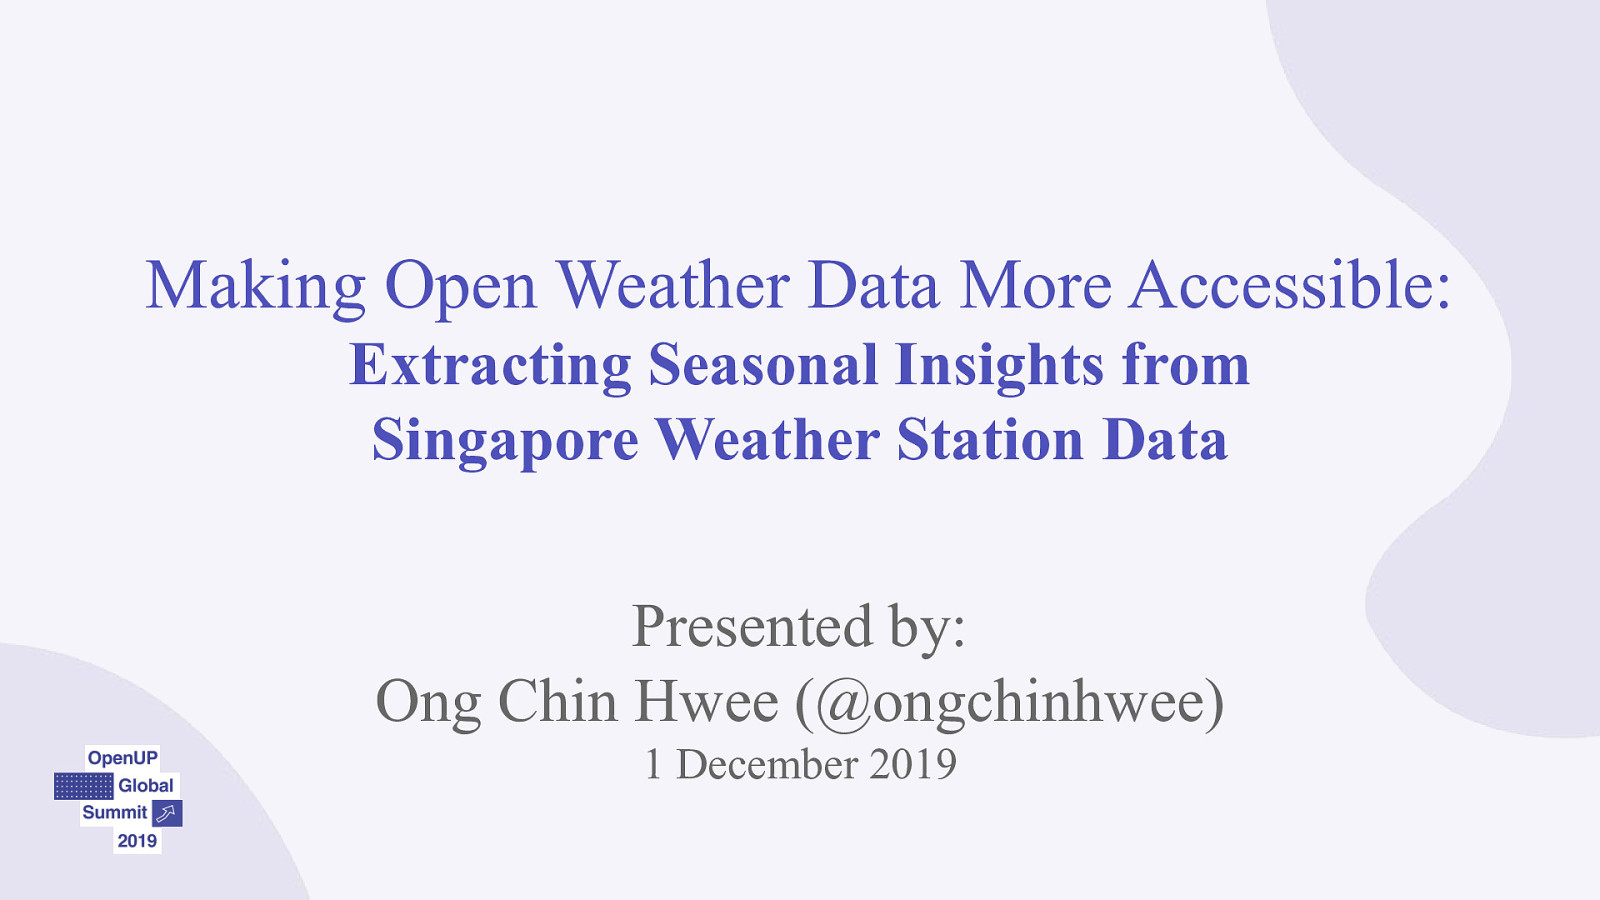 Making Open Weather Data More Accessible: Extracting Seasonal Insights from Singapore Weather Station Data